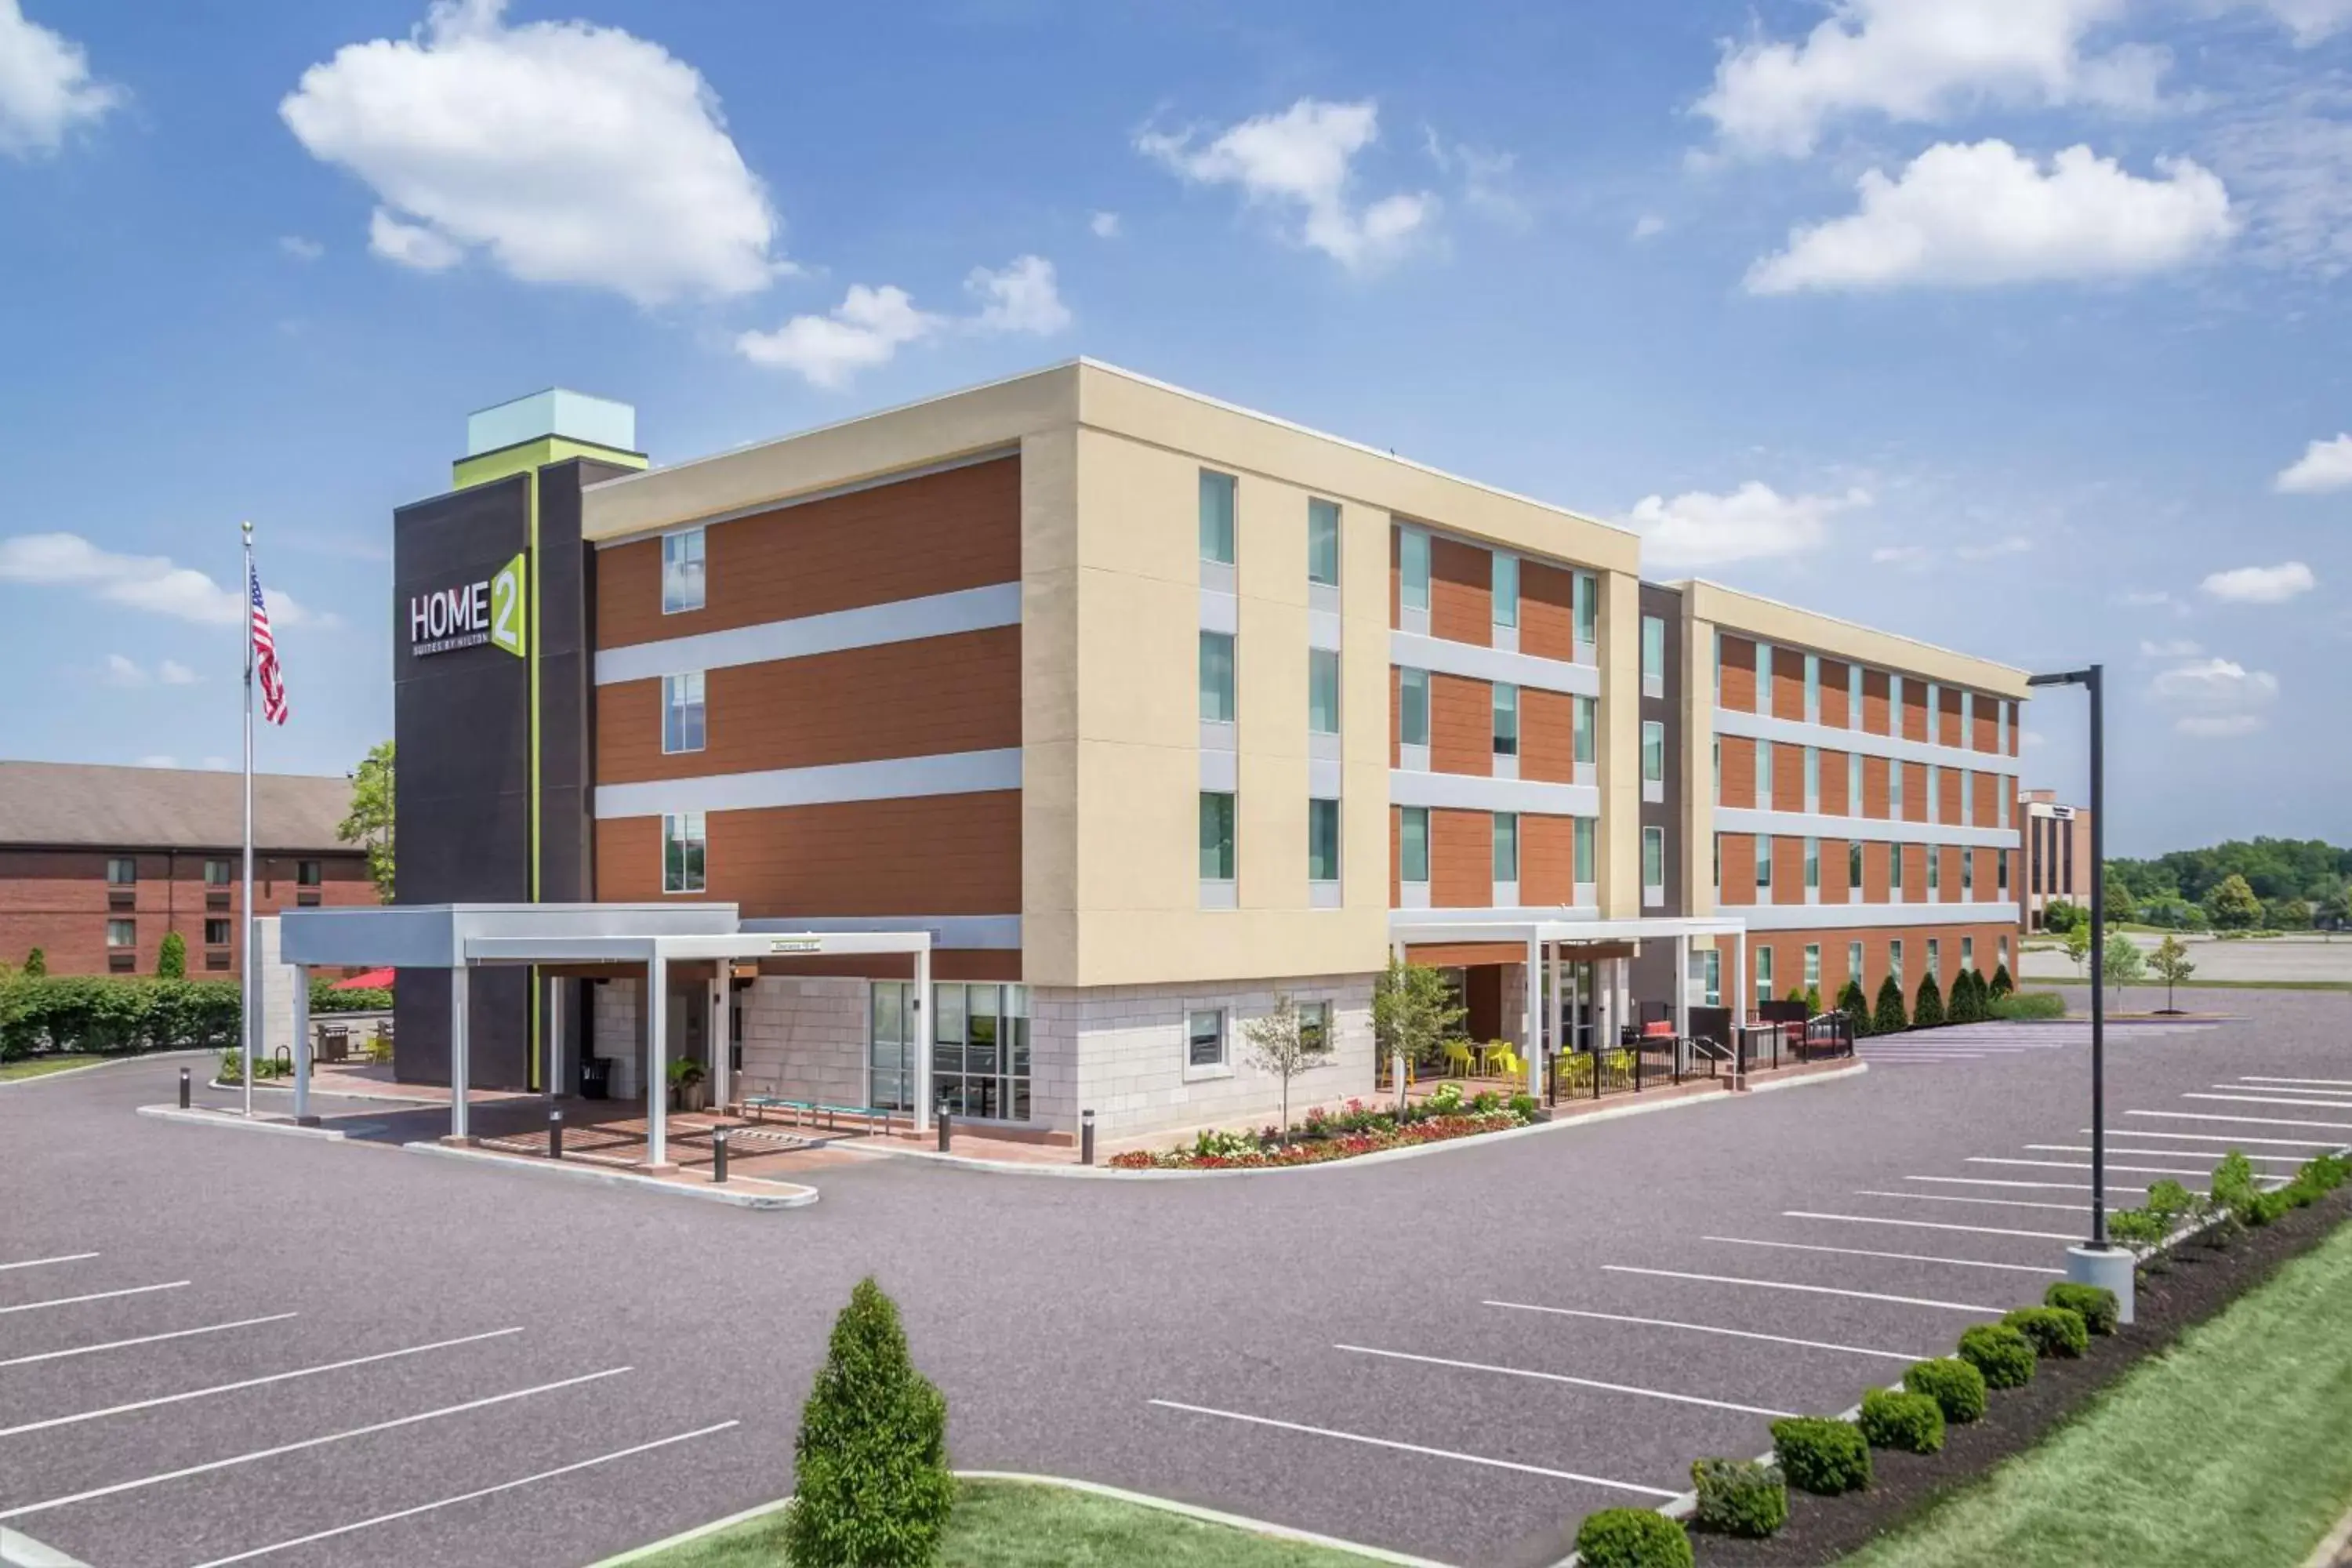 Property Building in Home 2 Suites By Hilton Indianapolis Northwest